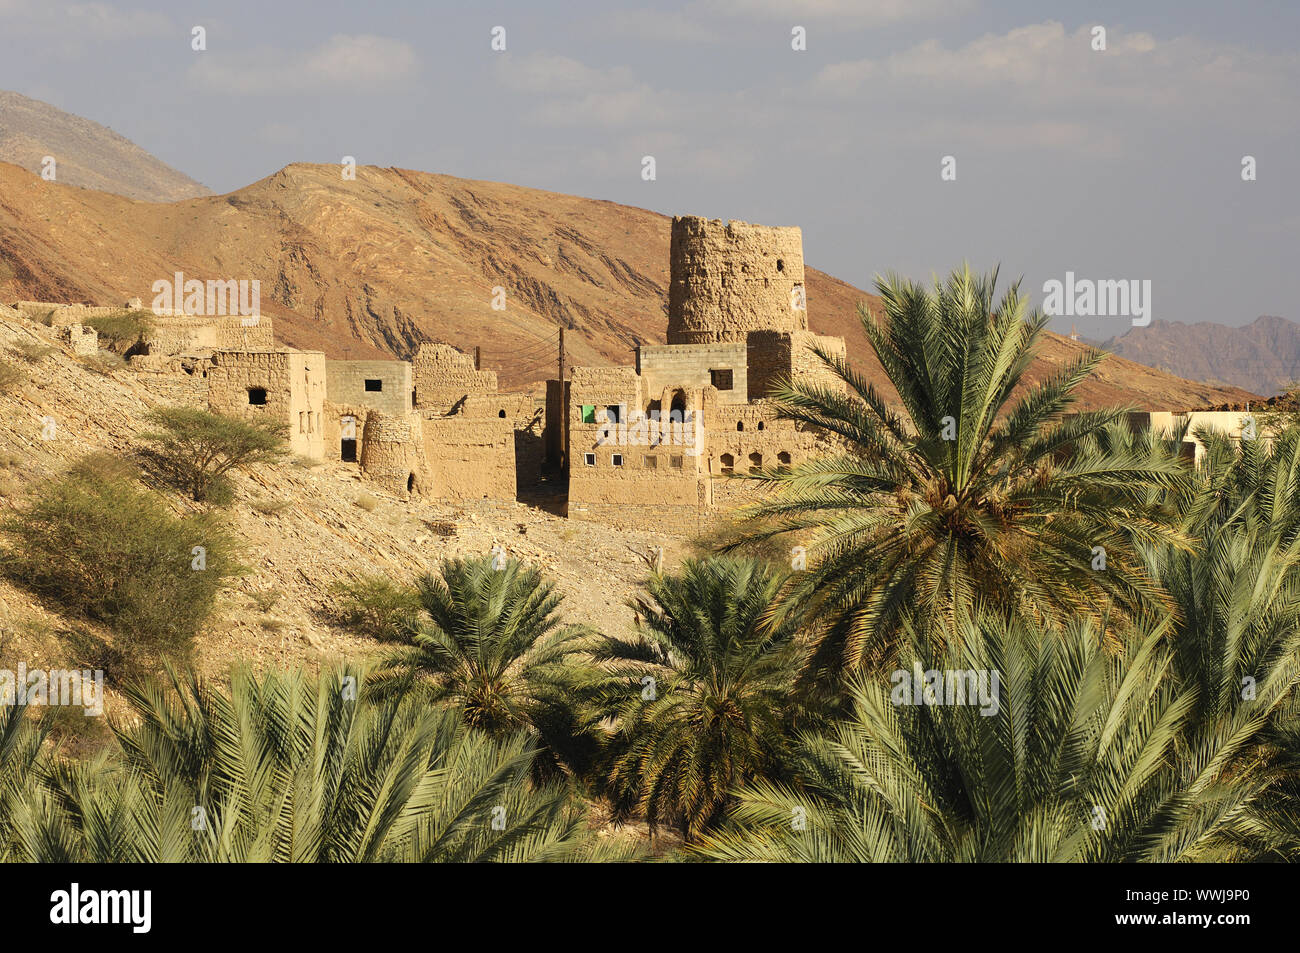 Clay watchtower, Oman Stock Photo